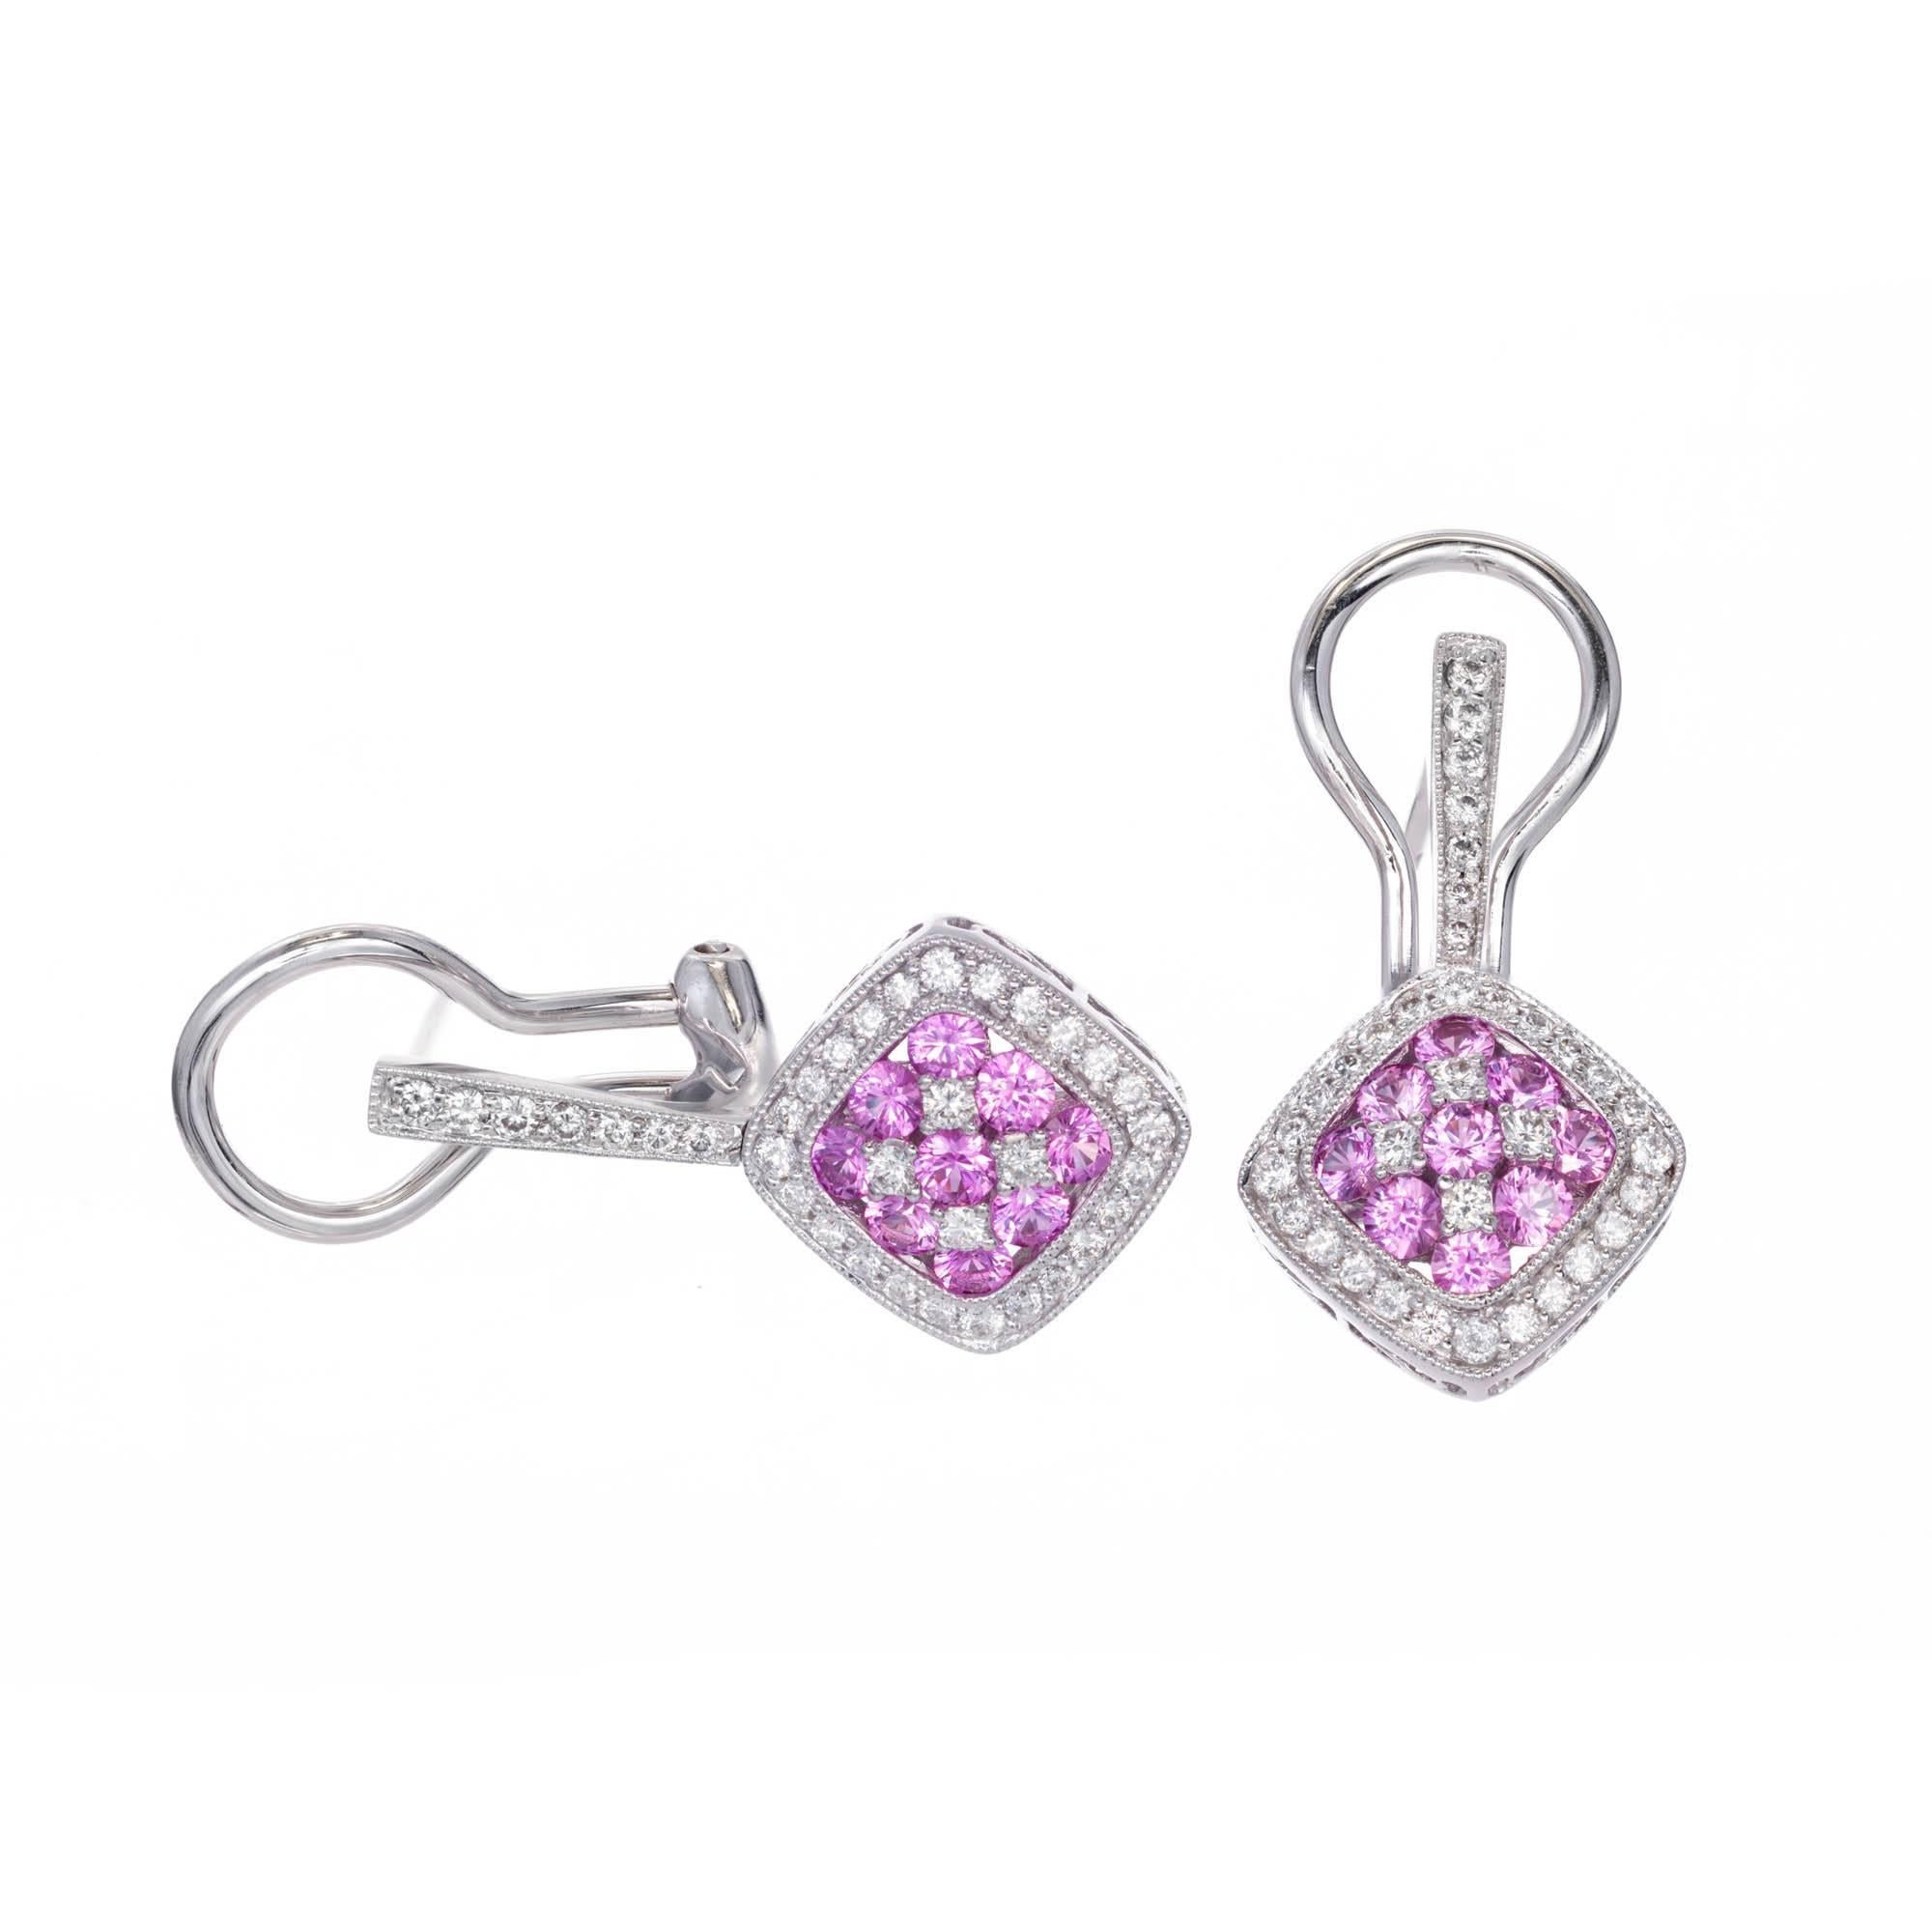 Gregg Ruth pink Sapphire Diamond dangle earrings. 18k white gold with clip and post.

68 round Diamonds, approx. total weight .47cts 
18 round pink Sapphires, approx. total weight .88cts 
18k white gold 
Top to bottom: 27.78mm or 1.09 inches 
Width: